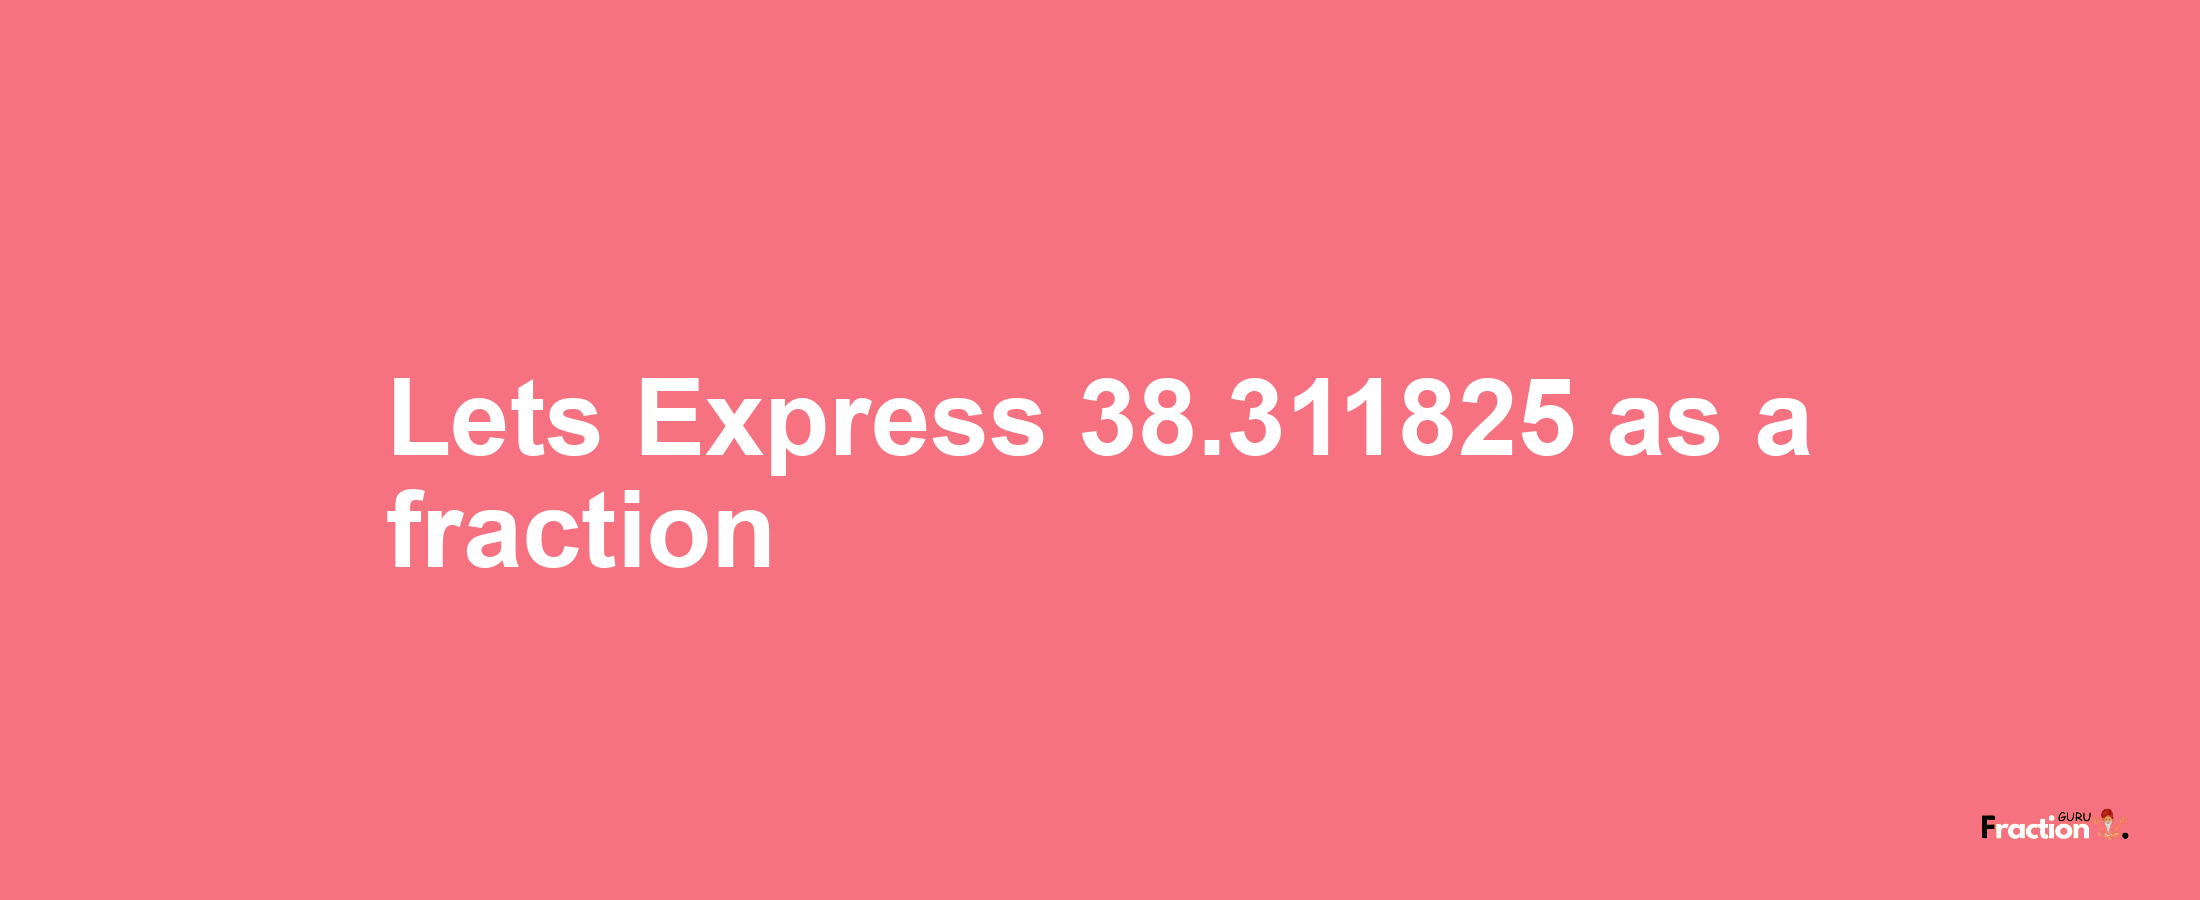 Lets Express 38.311825 as afraction